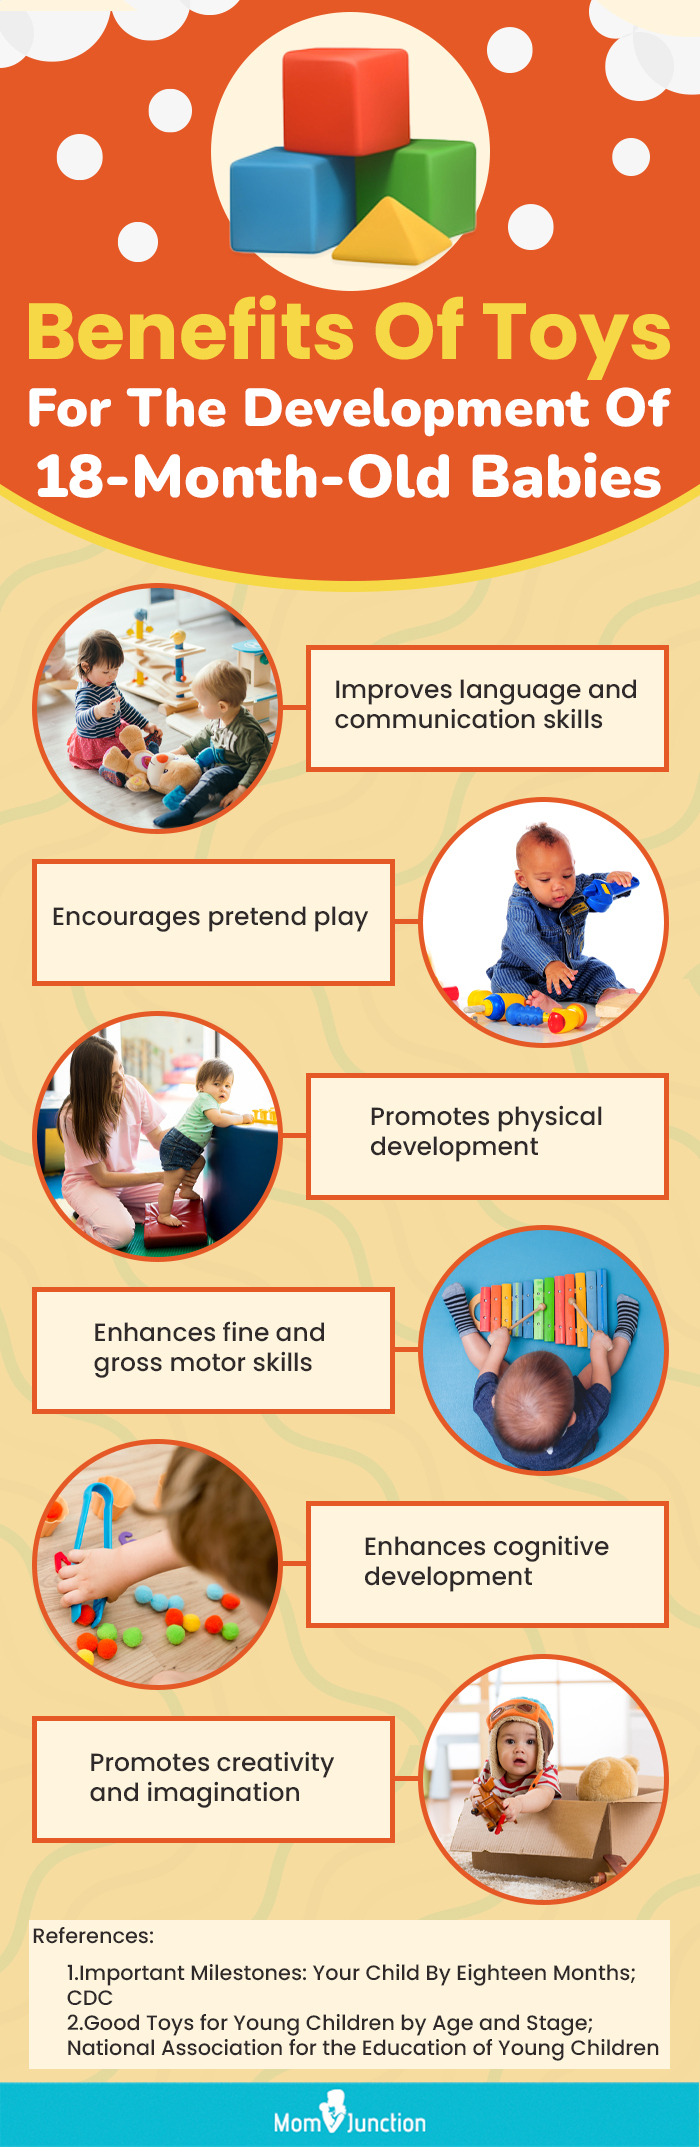 Benefits Of Toys For The Development Of 18 Month Old Babies (infographic)